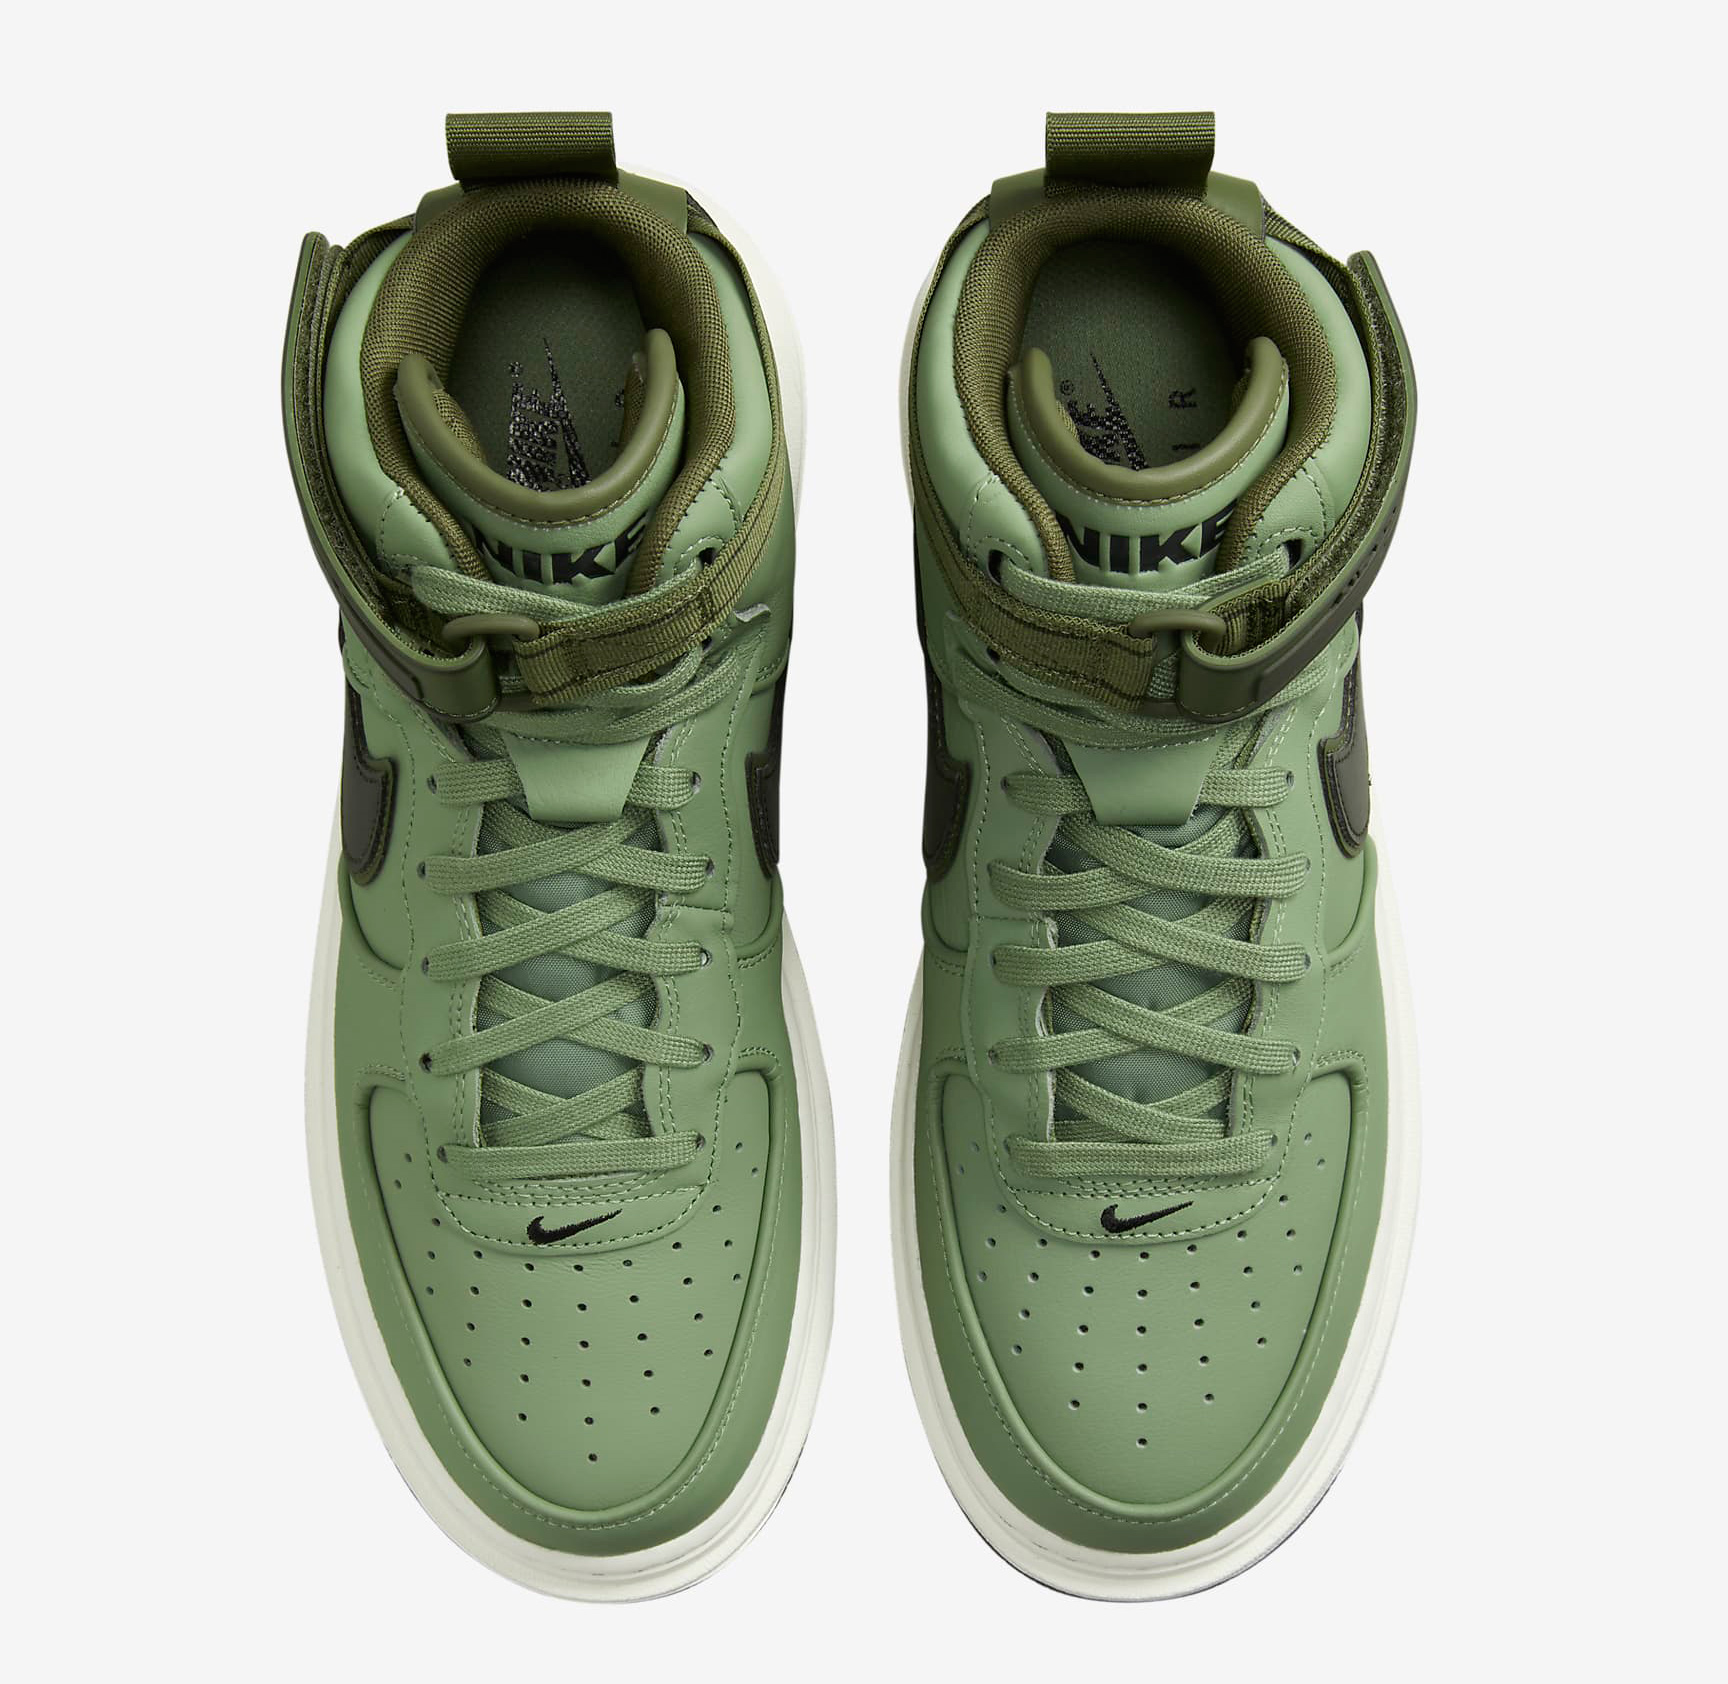 nike-air-force-1-boots-oil-green-medium-olive-4